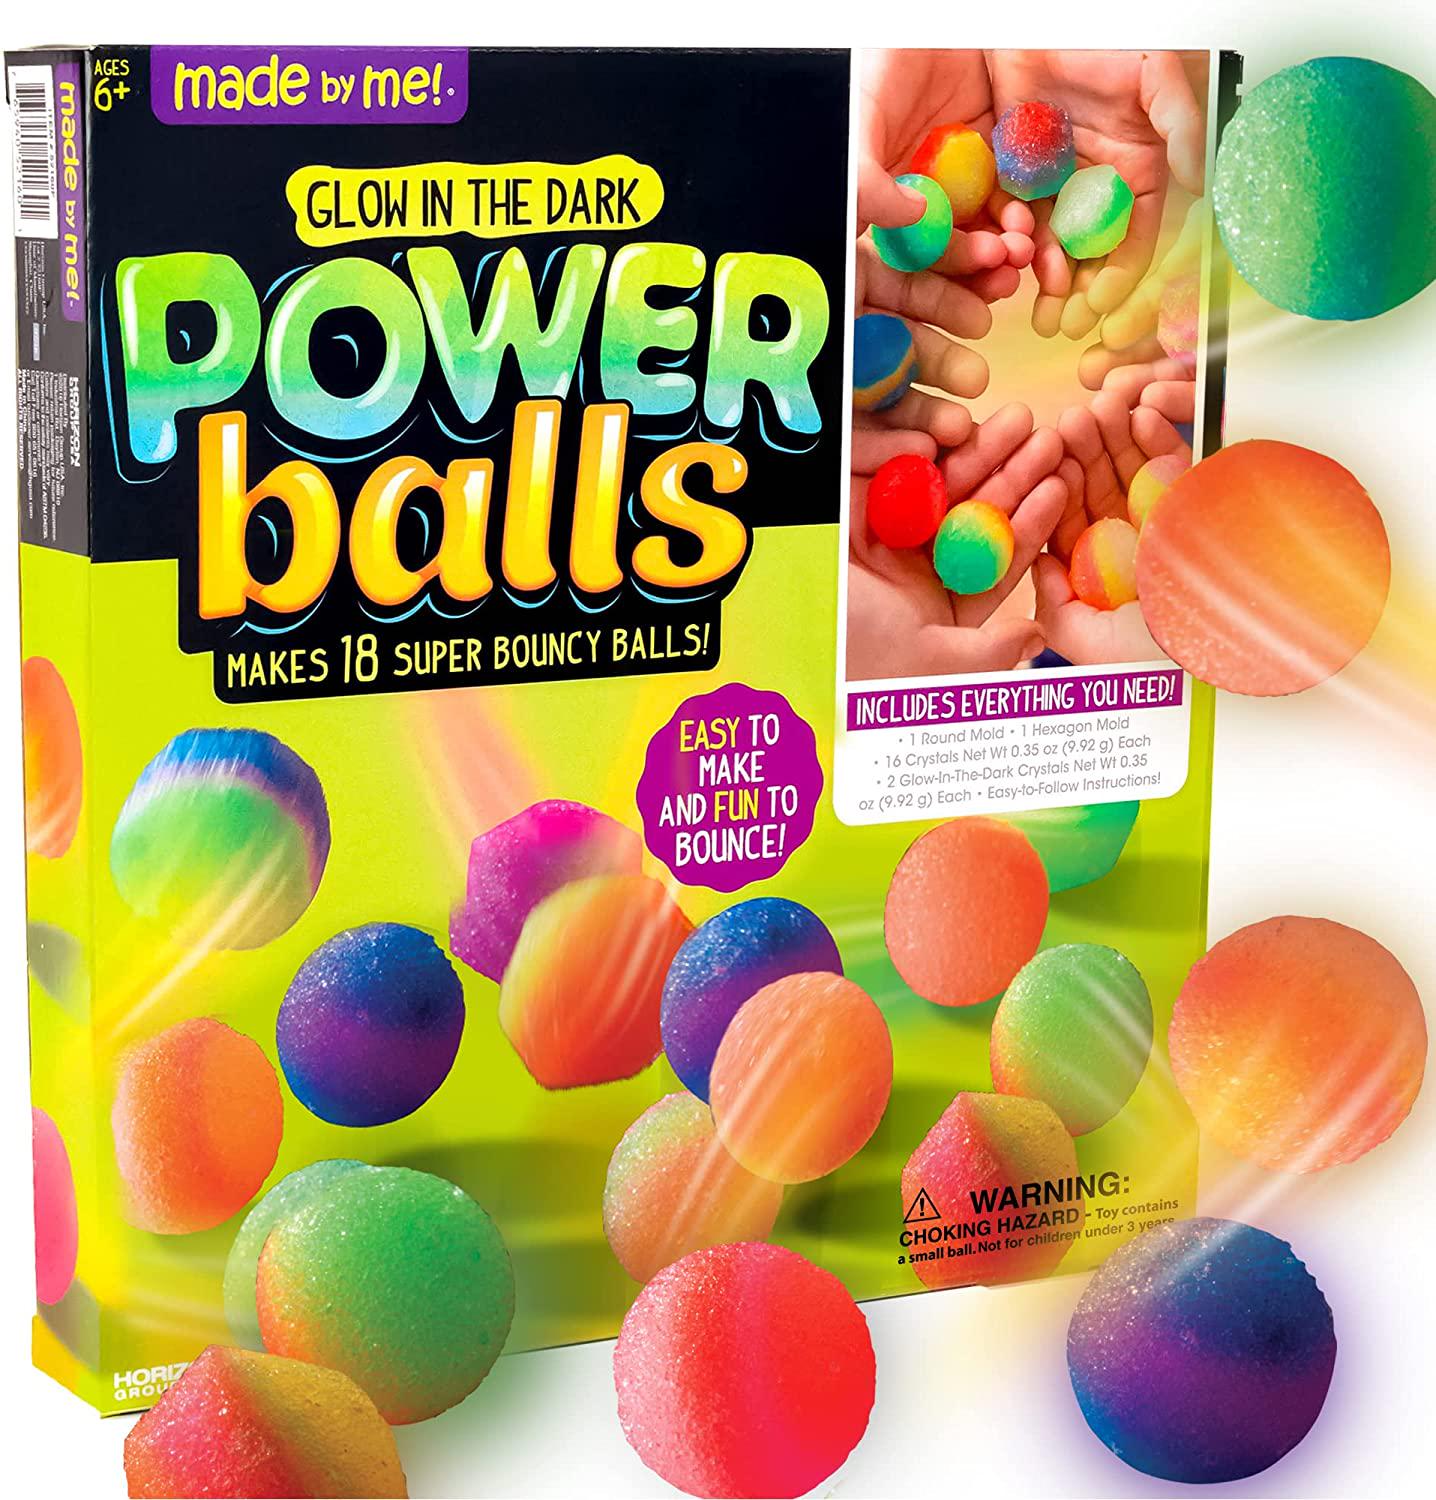 Made By Me, Made By Me Glow The Dark Powerballs by Horizon Group USA, DIY STEM Kit. Make 18 Bouncy Crystal Power Balls, Molds and Instructions Included,Multicolored